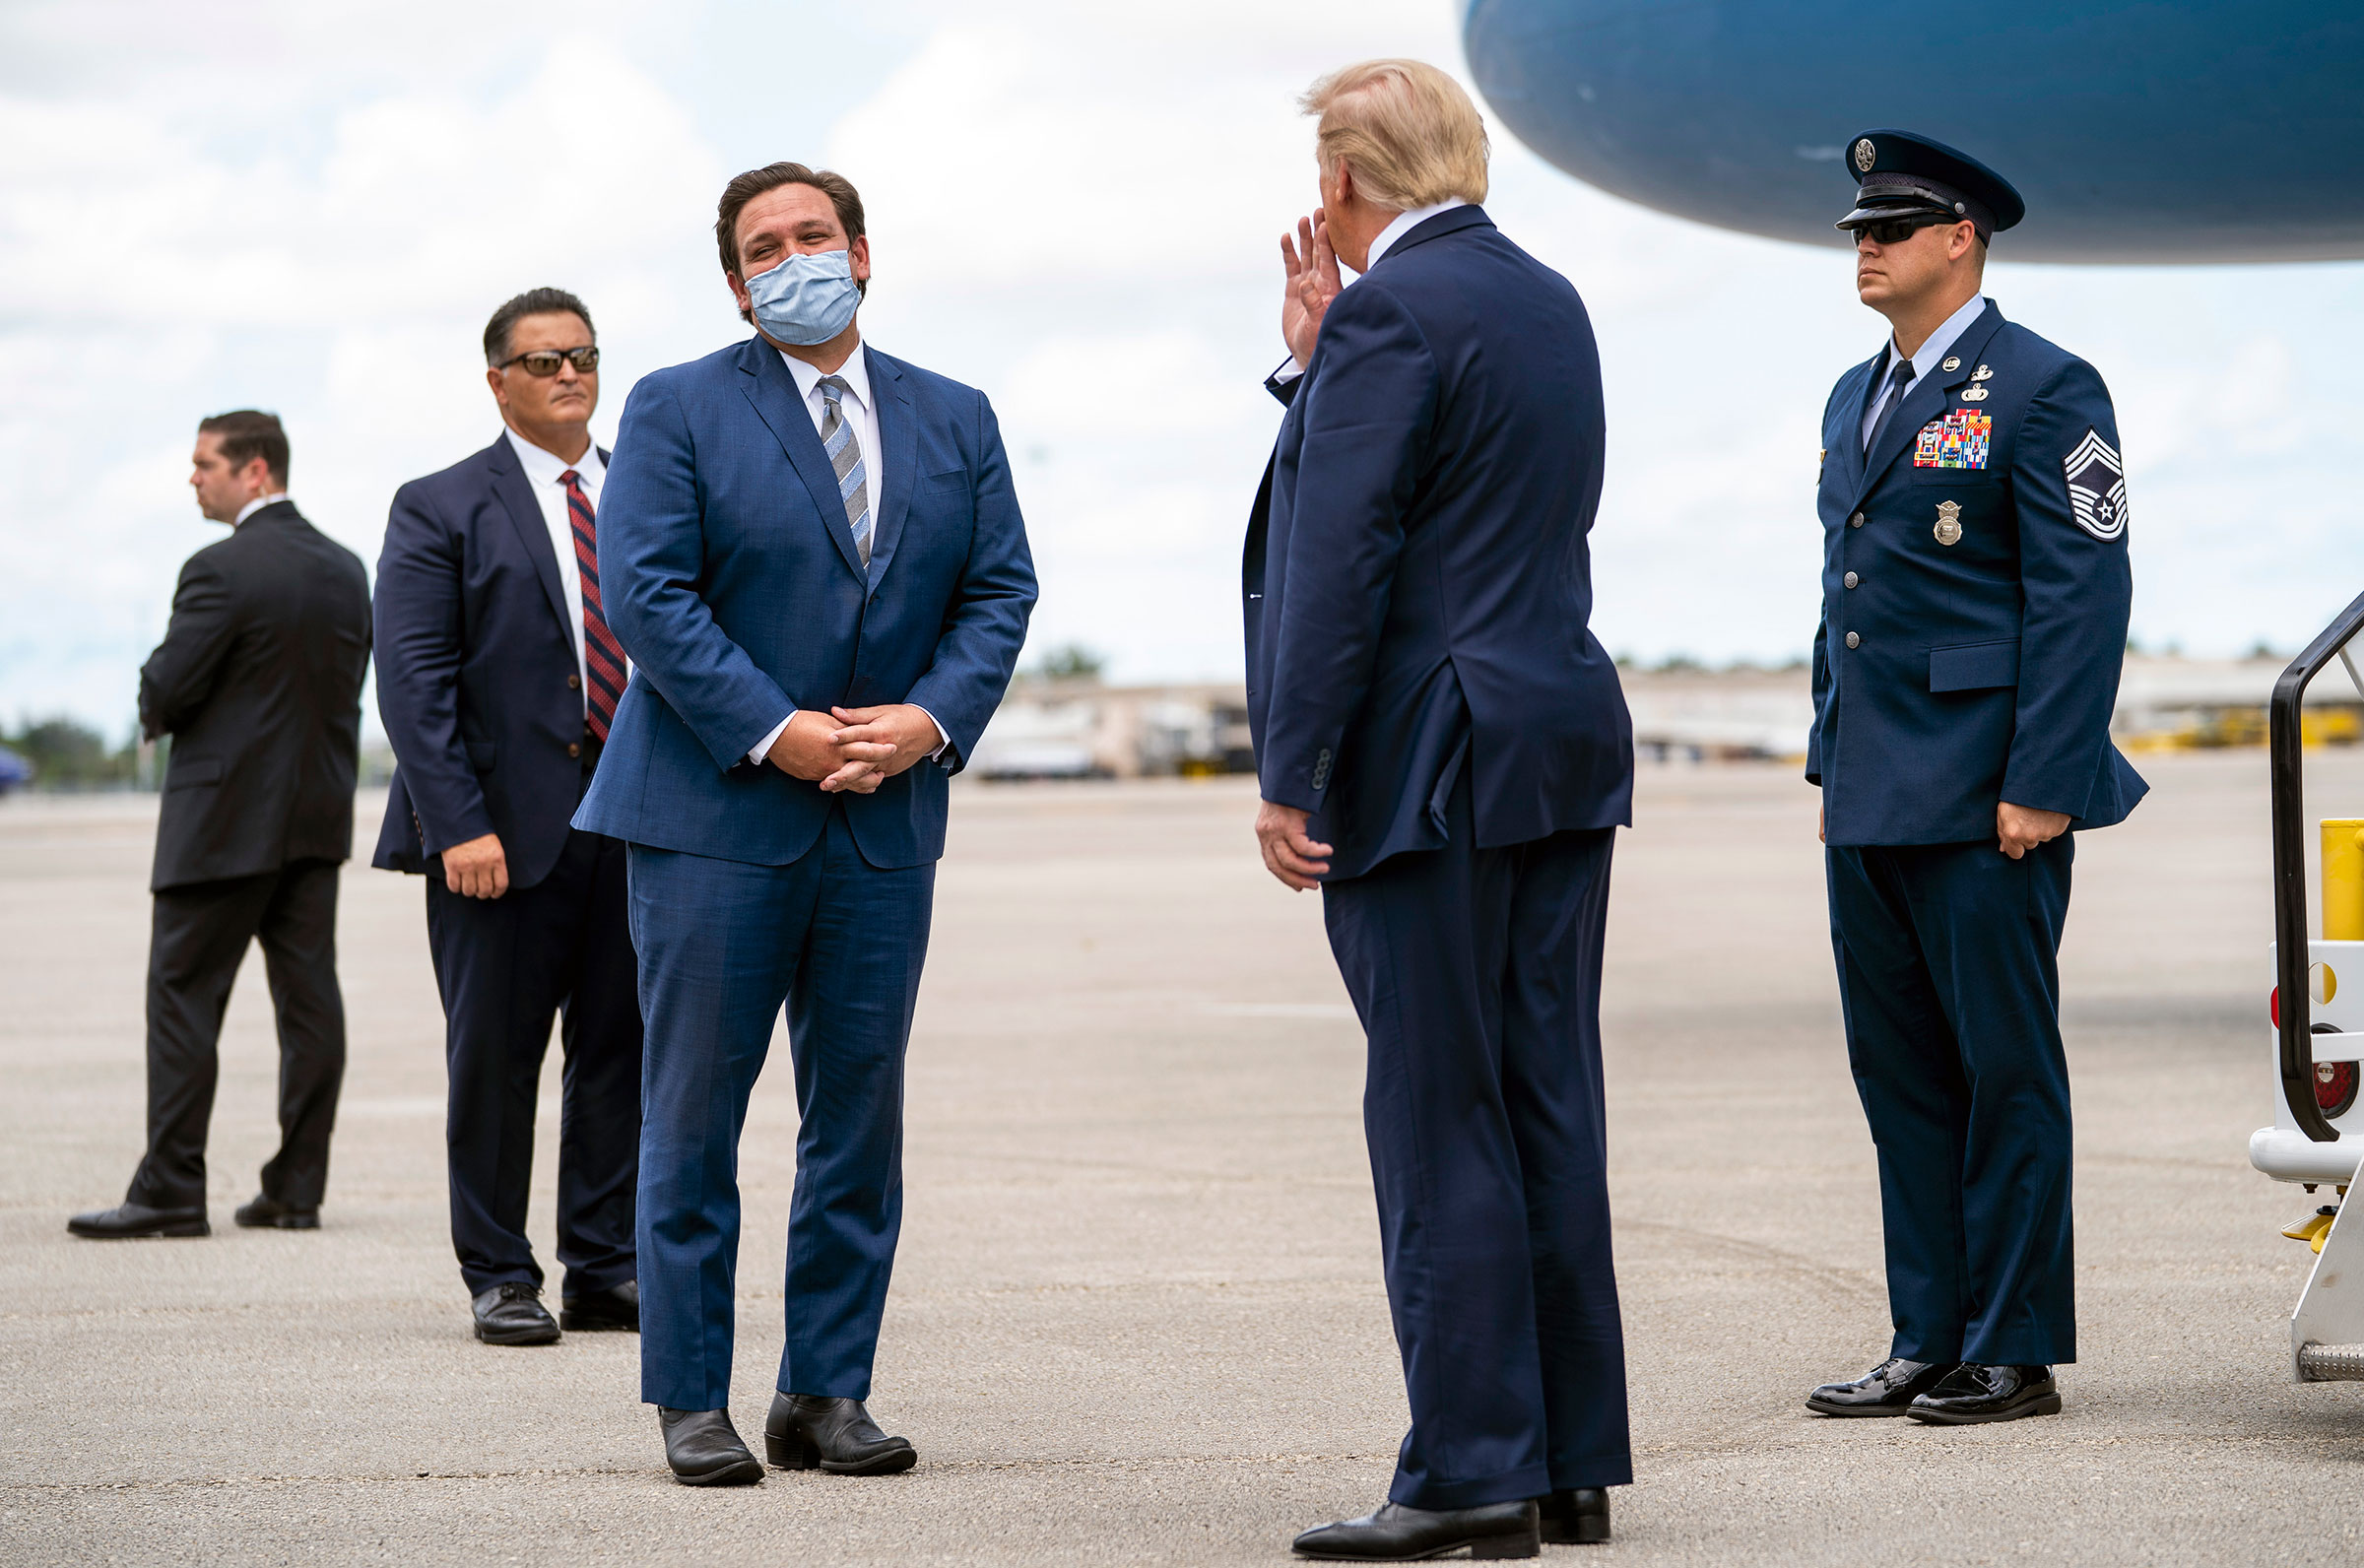 President Donald Trump is greeted by Gov. Ron DeSantis of Florida upon his arrival at Palm Beach International Airport